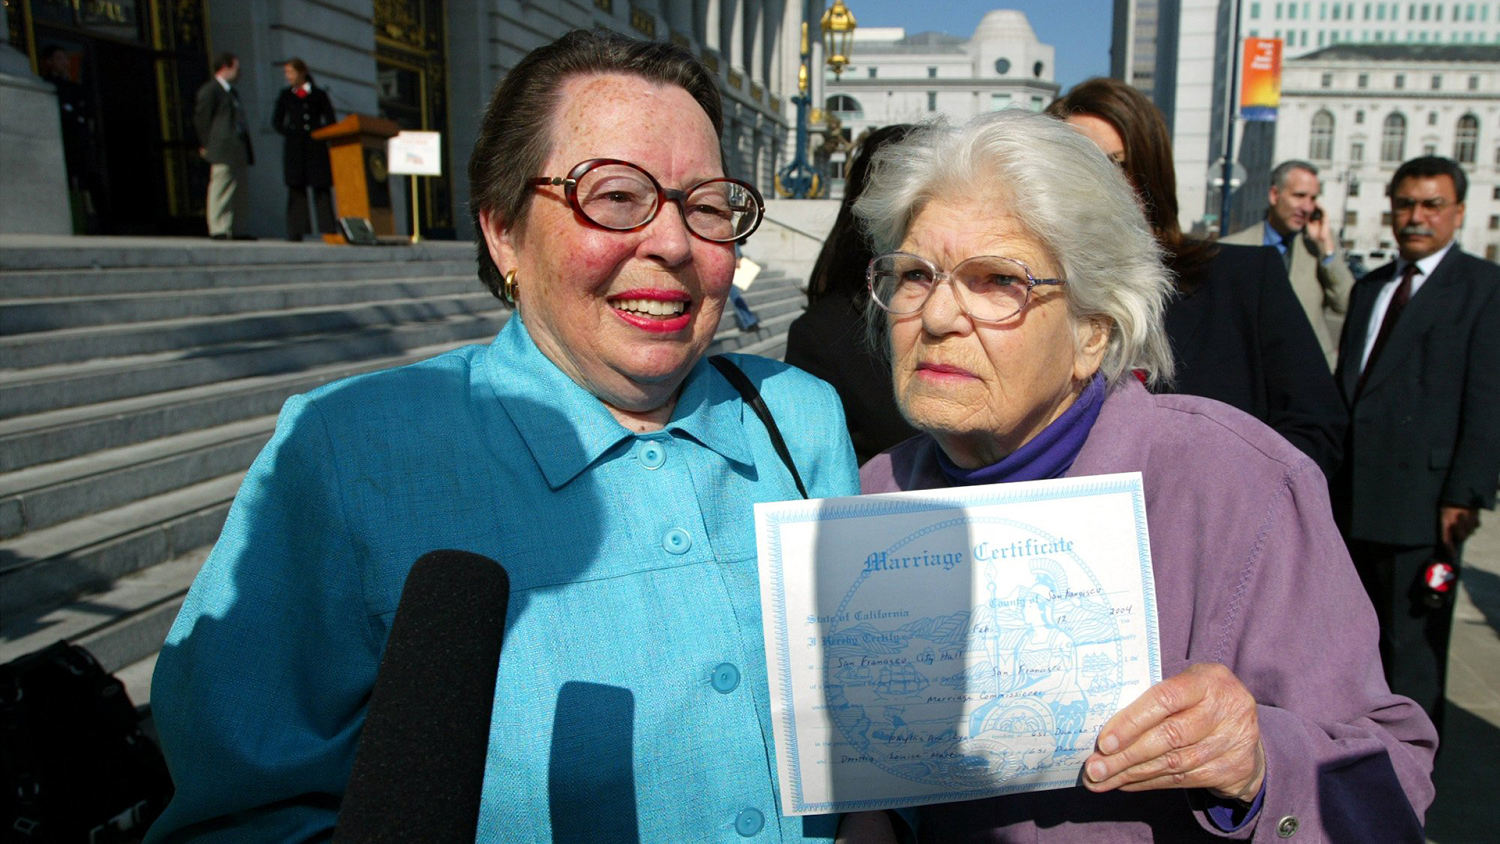 2004: Del Martin and Phyllis Lyon tie the knot at San Francisco civil ceremony